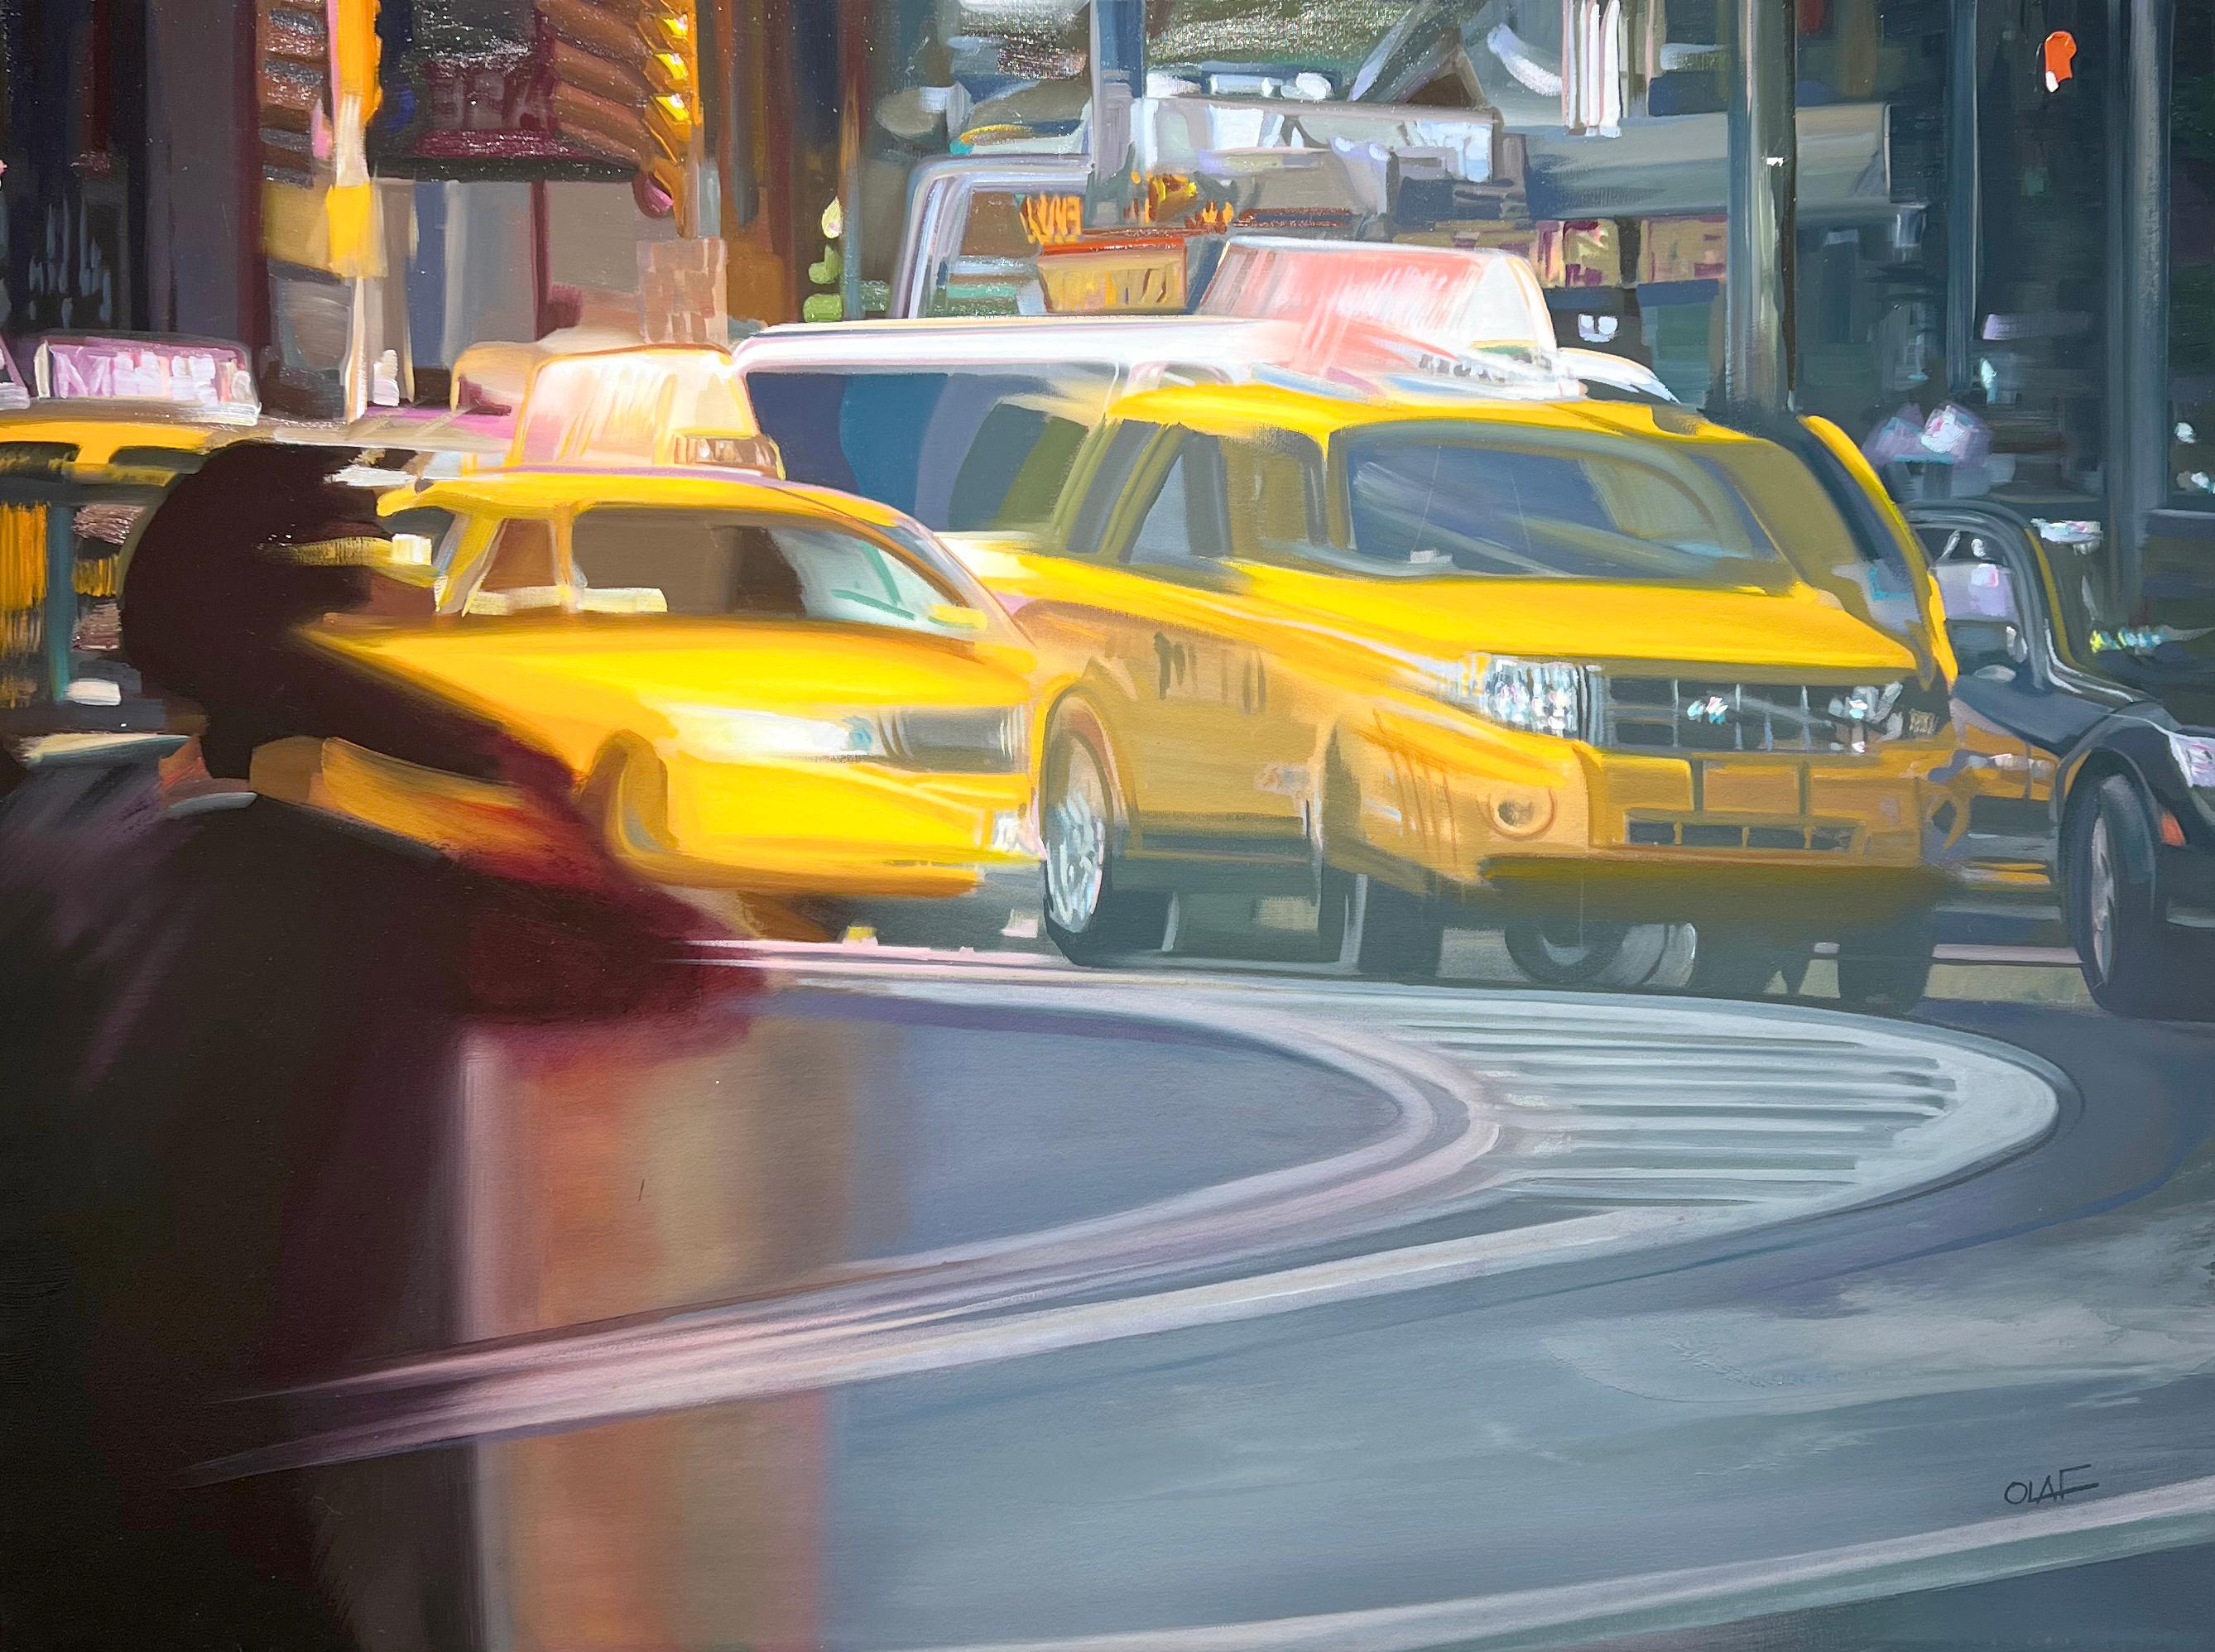 Olaf Schneider, "Apex", 30x40 Taxi Cab New York Cityscape Oil Painting on Canvas